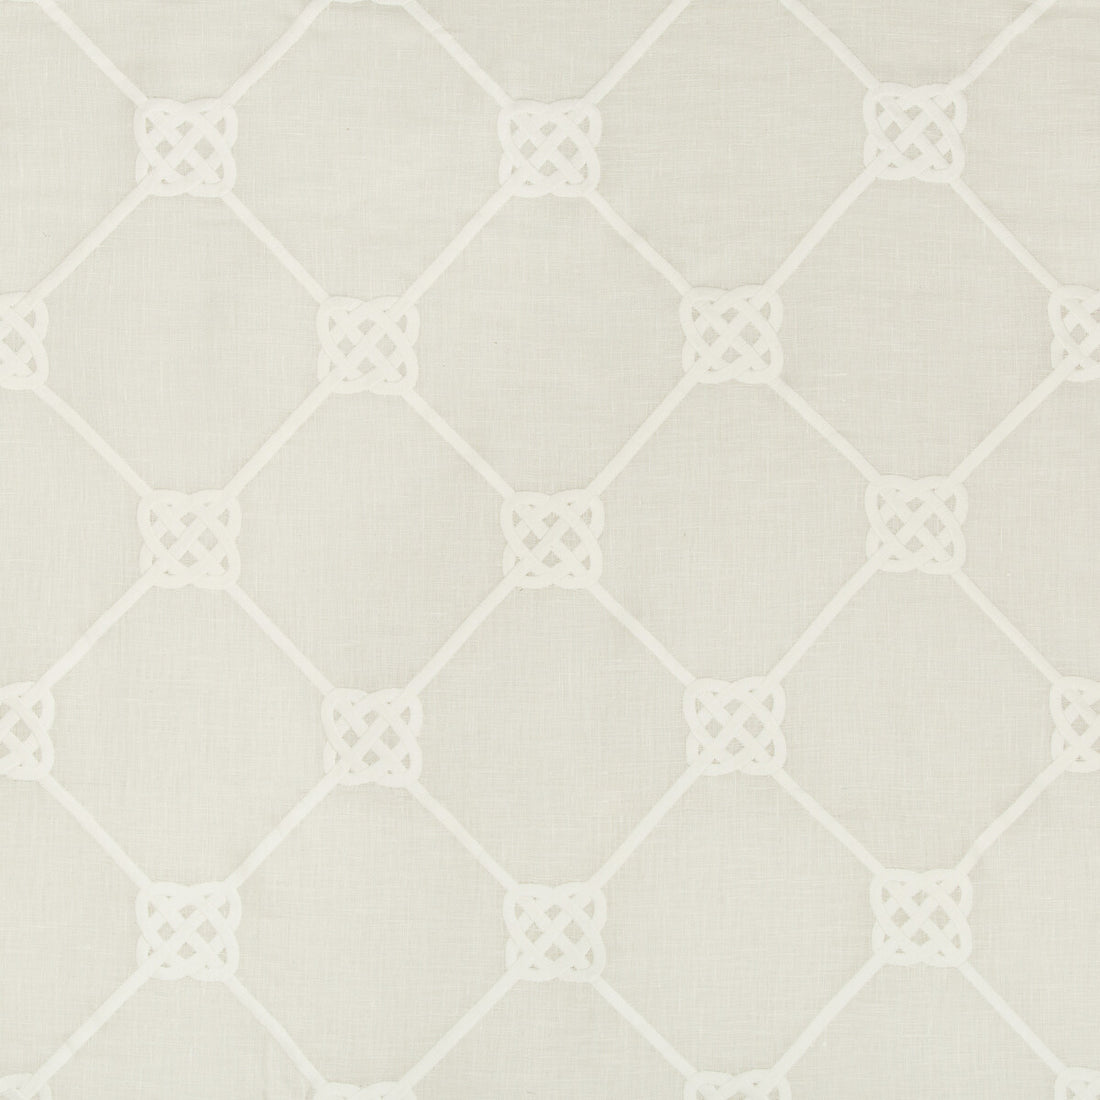 Knot Sheer fabric in ivory color - pattern 4635.1.0 - by Kravet Basics in the Bermuda collection